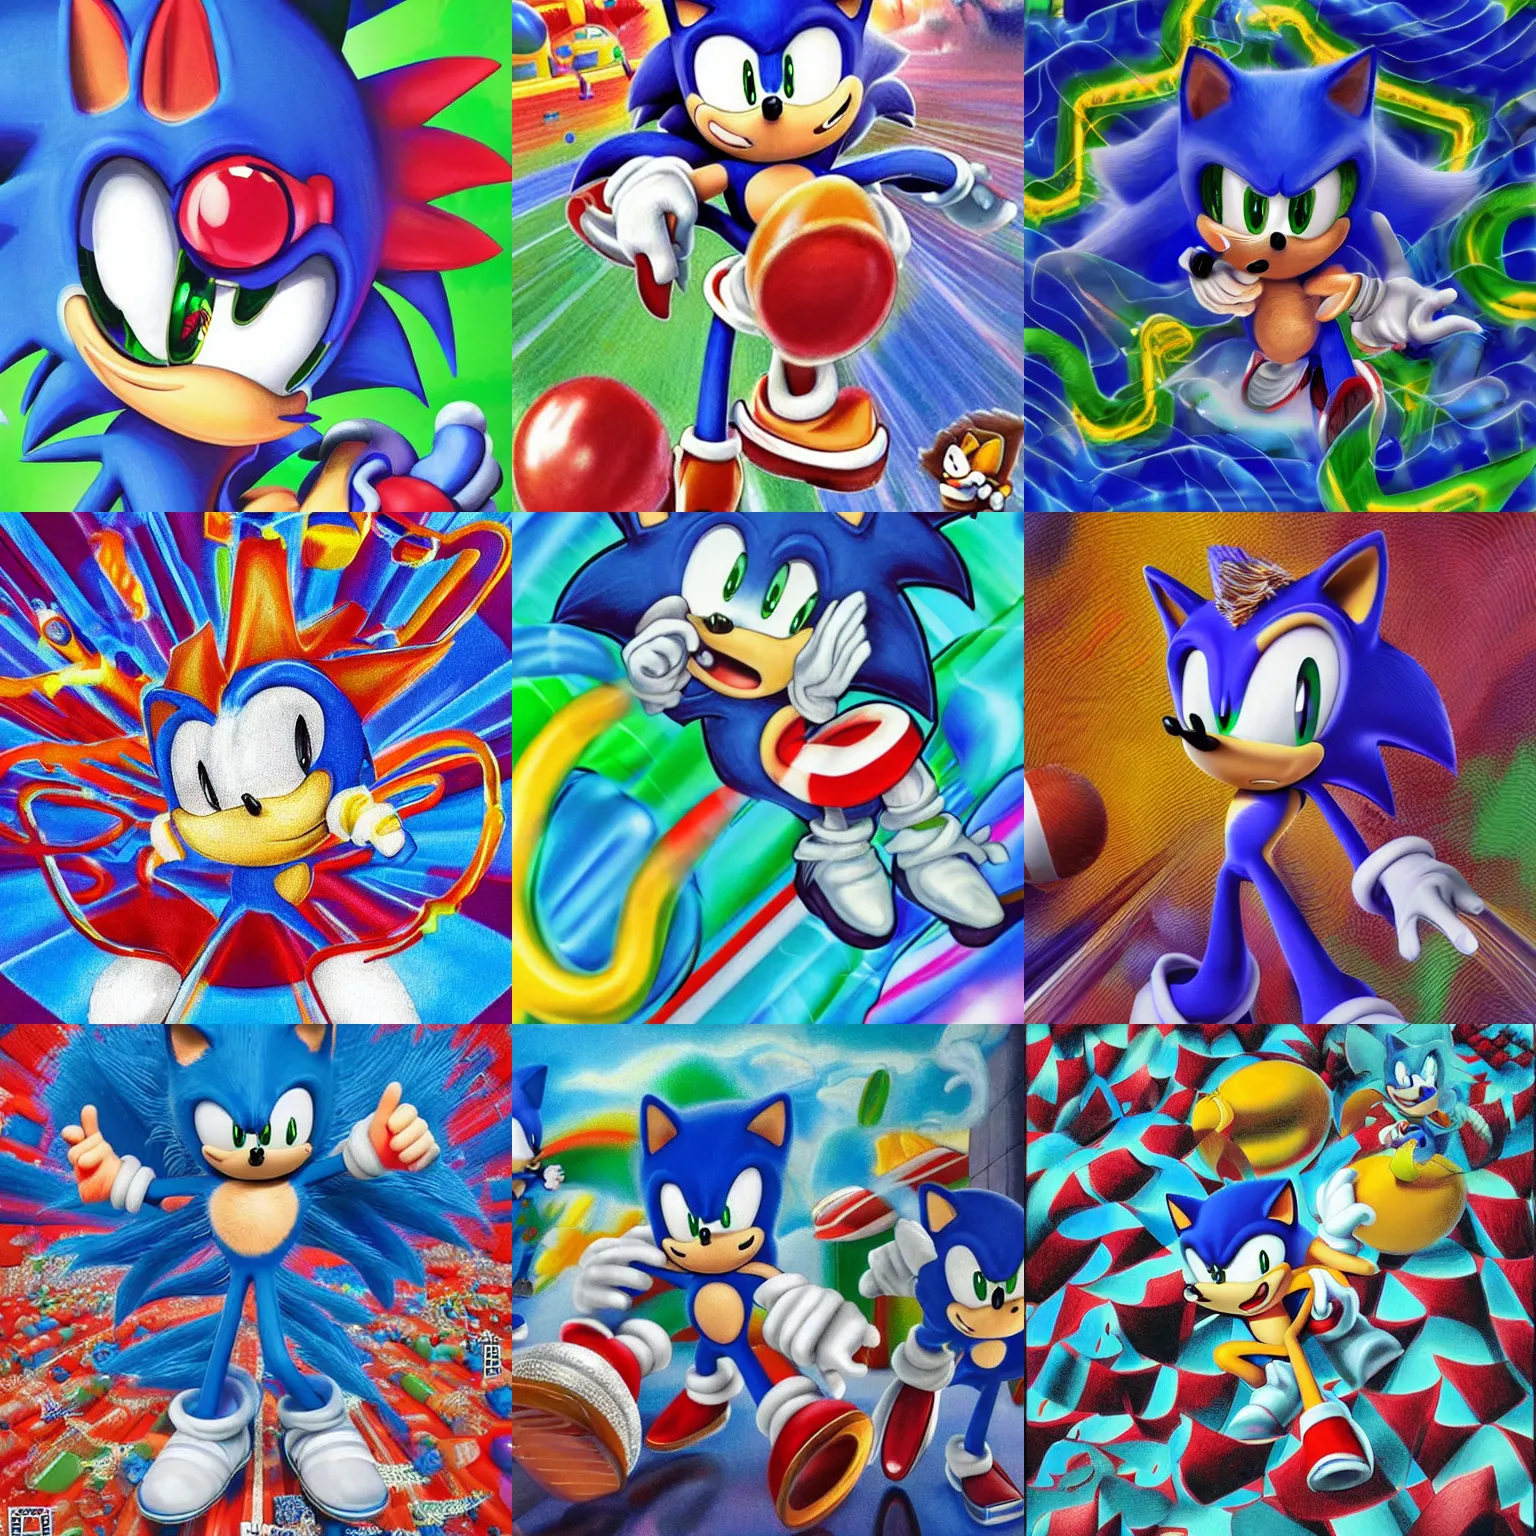 Prompt: sonic the hedgehog portrait, surreal, sharp, detailed professional, soft pastels, high quality airbrush art album cover of a liquid bubbles airbrush art lsd taffy dmt sonic the hedgehog dashing through cotton candy, gummy worm checkerboard background, 1 9 9 0 s 1 9 9 2 sega genesis rareware video game eyeball